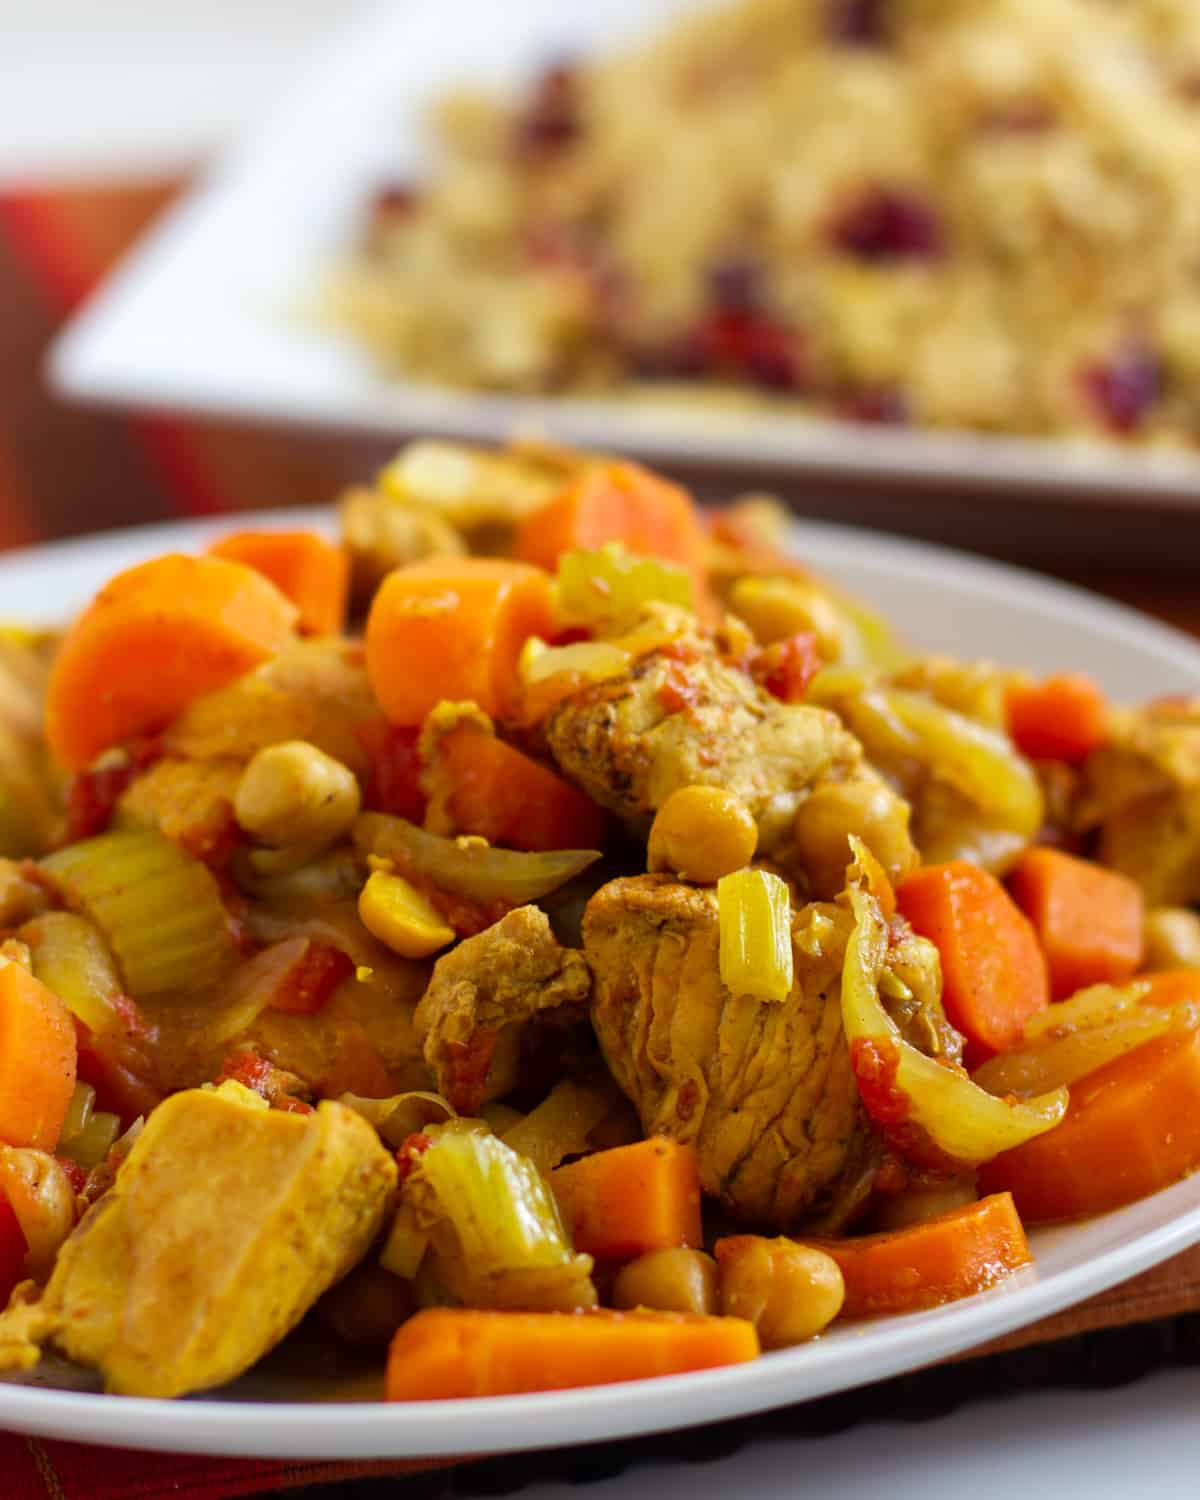 A dish with chicken, carrots and chick peas.